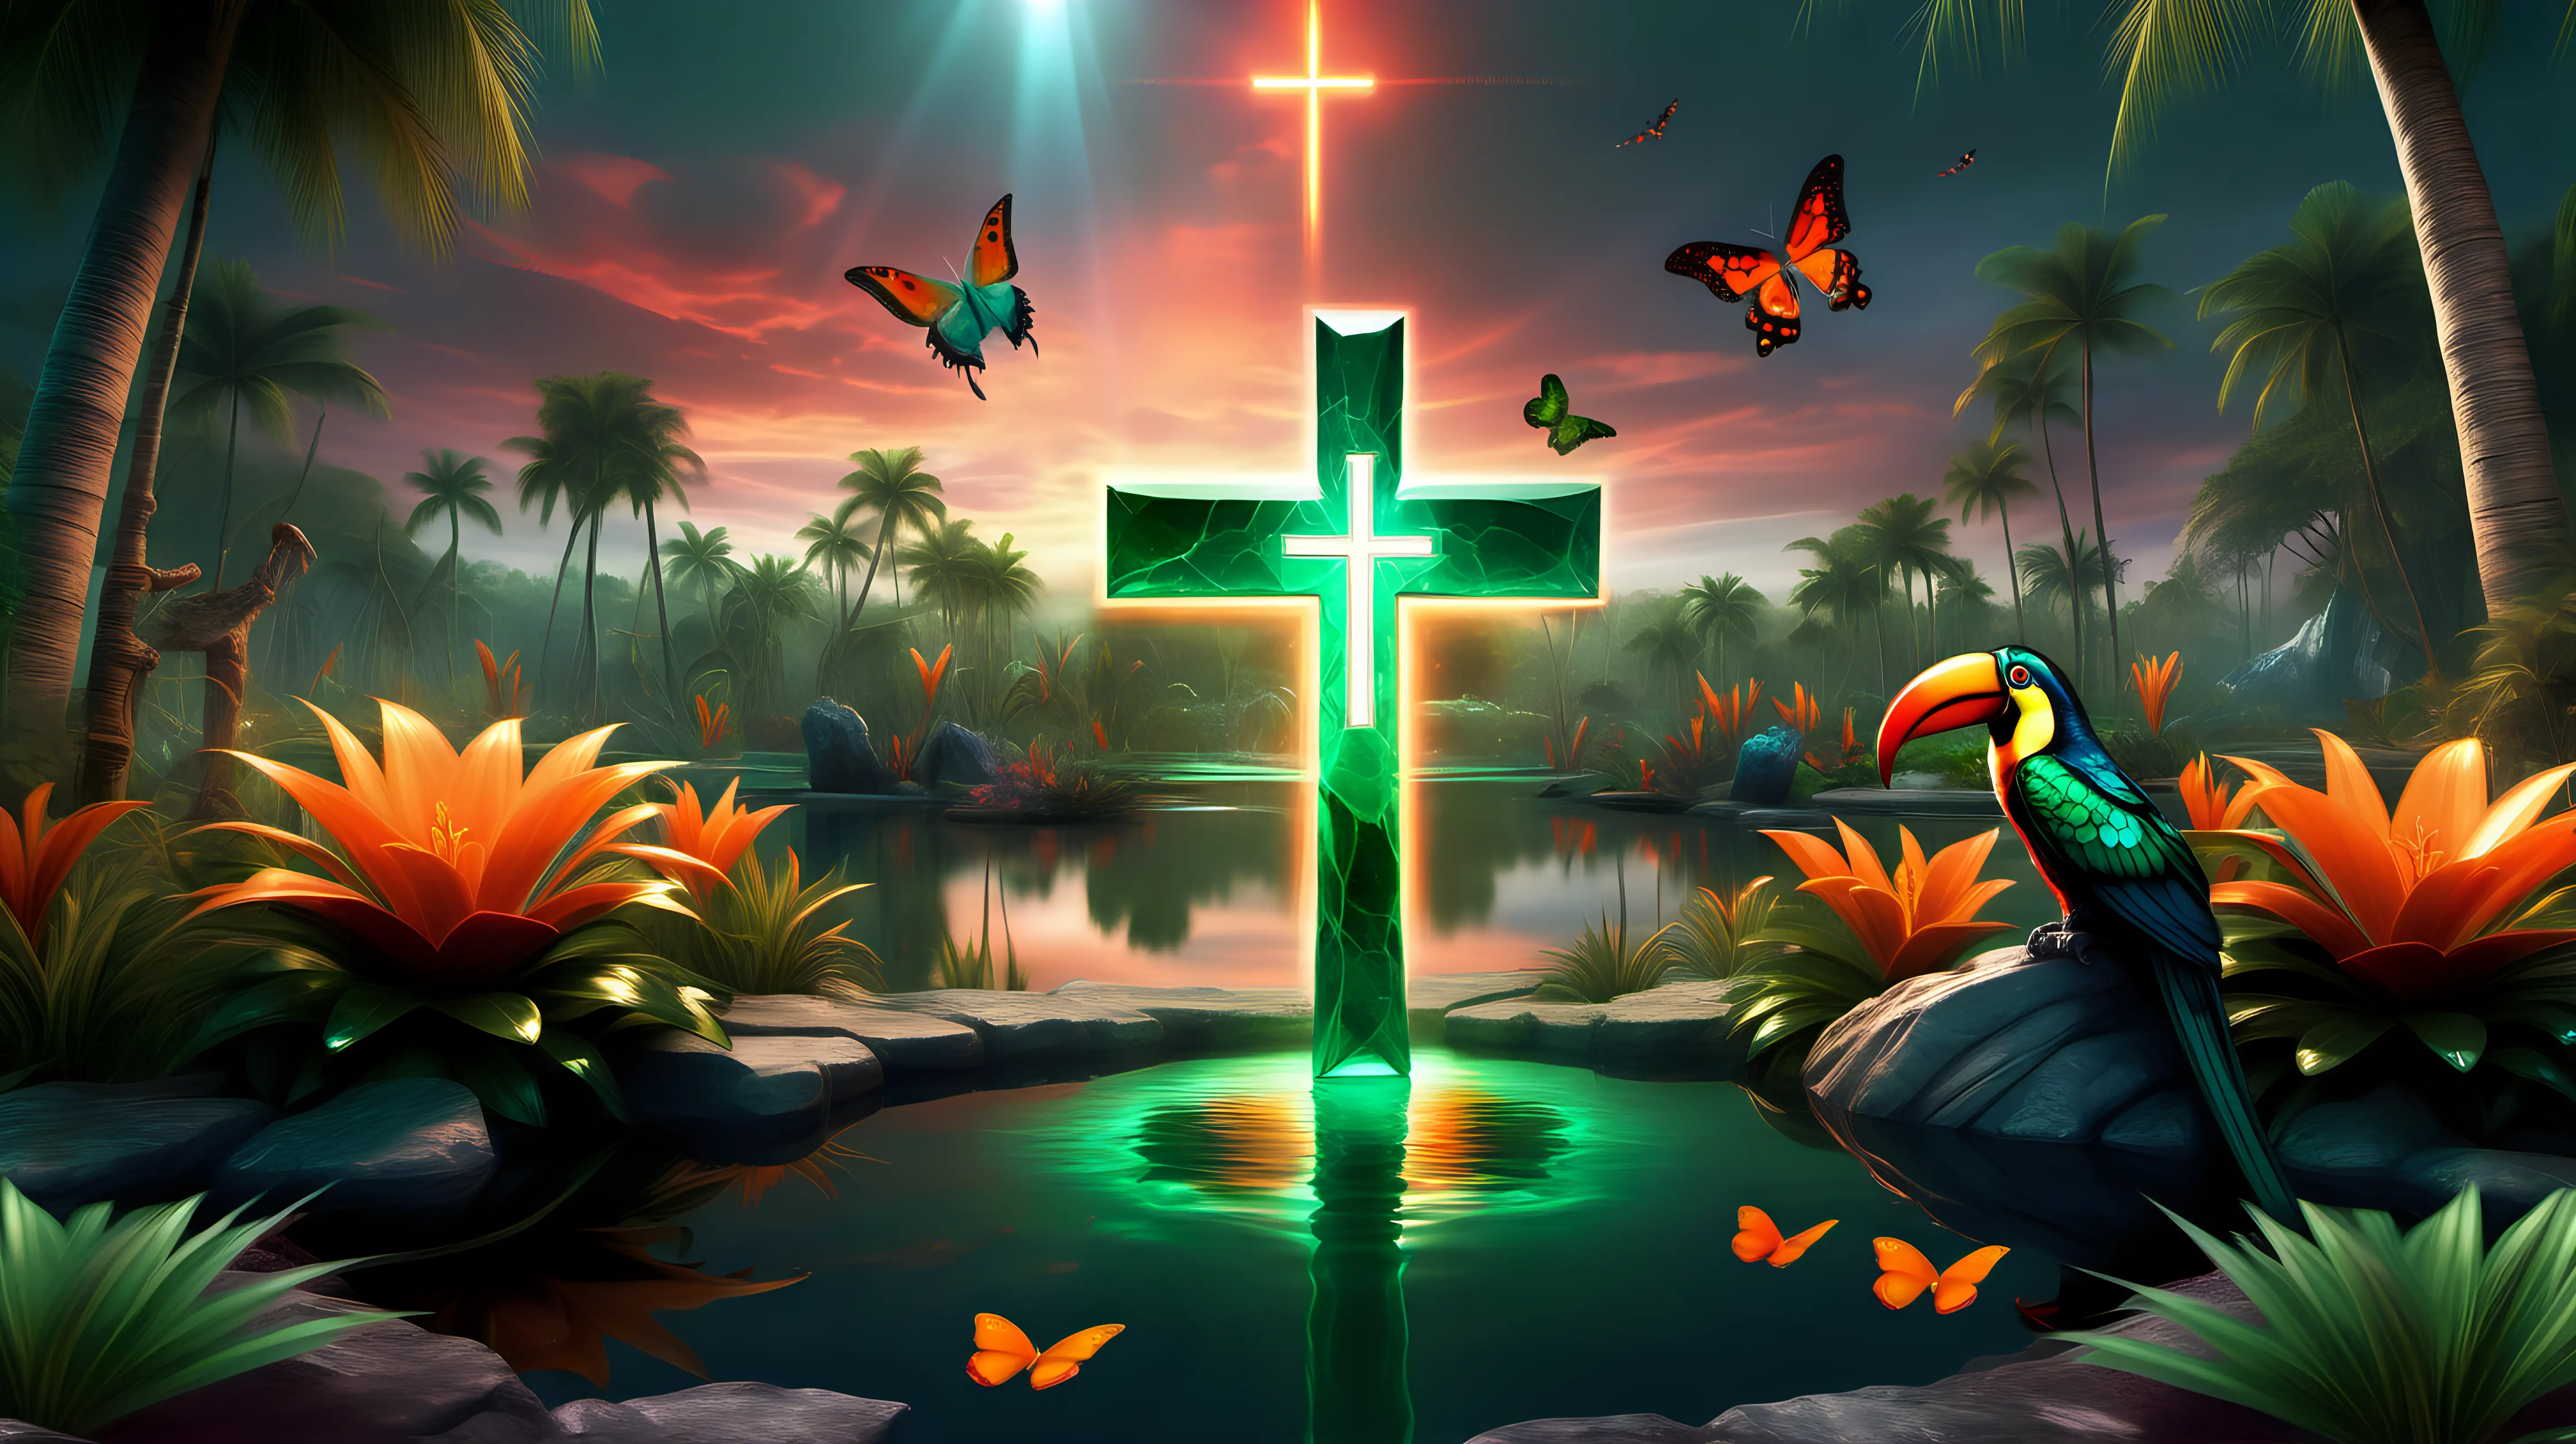 Enchanting Fantasy Landscape Glowing Emerald with Orange Cross in Vibrant Pond